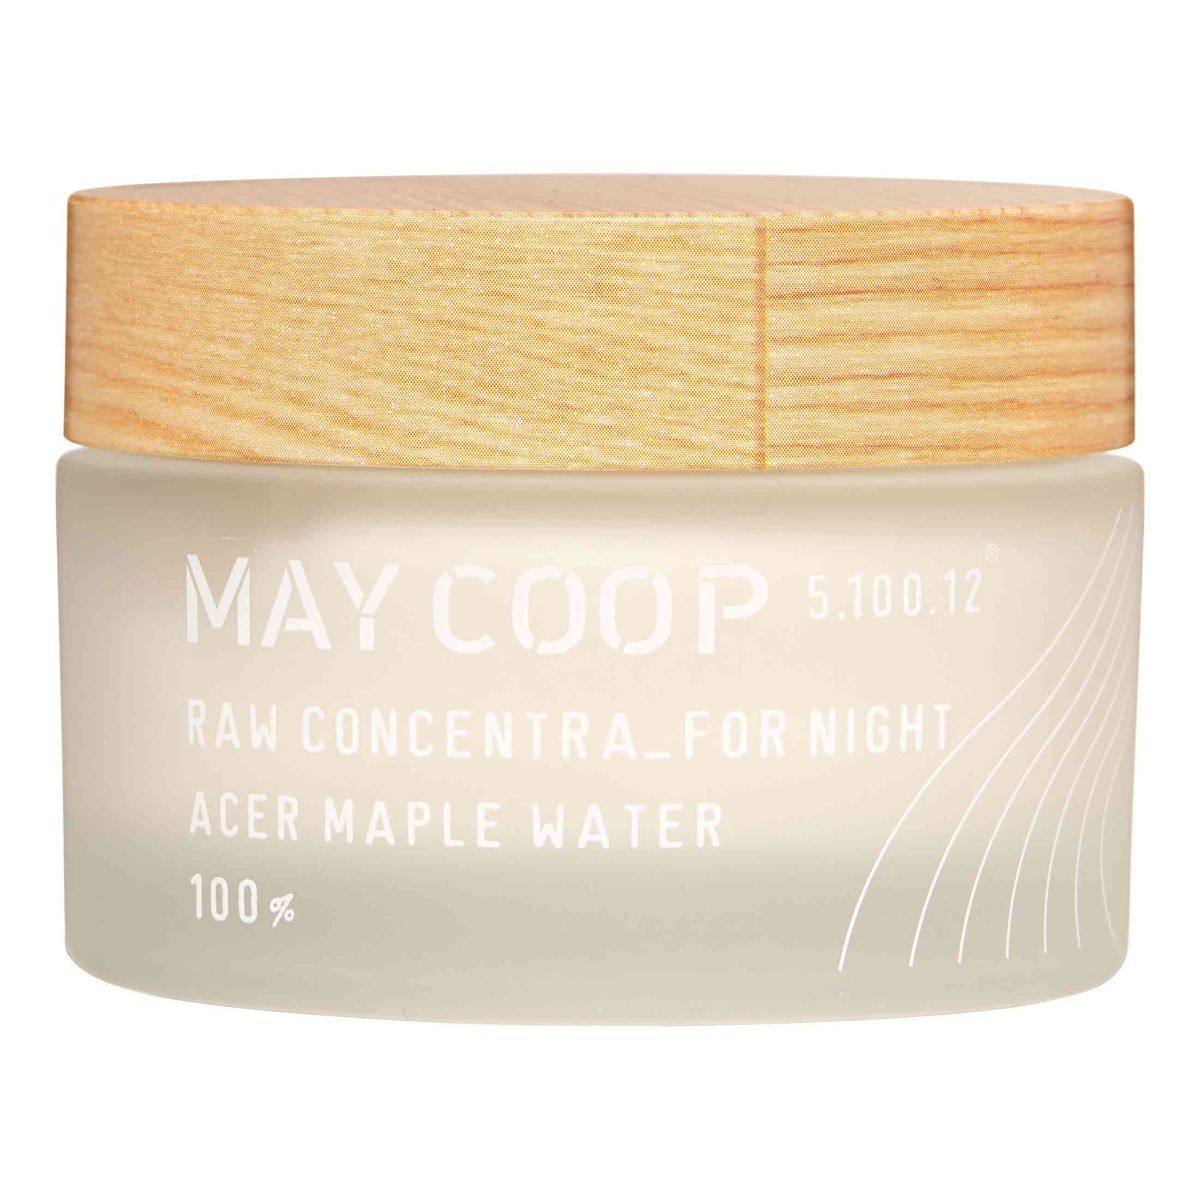 Kann Coop Raw Concentrate Nachtcreme coop